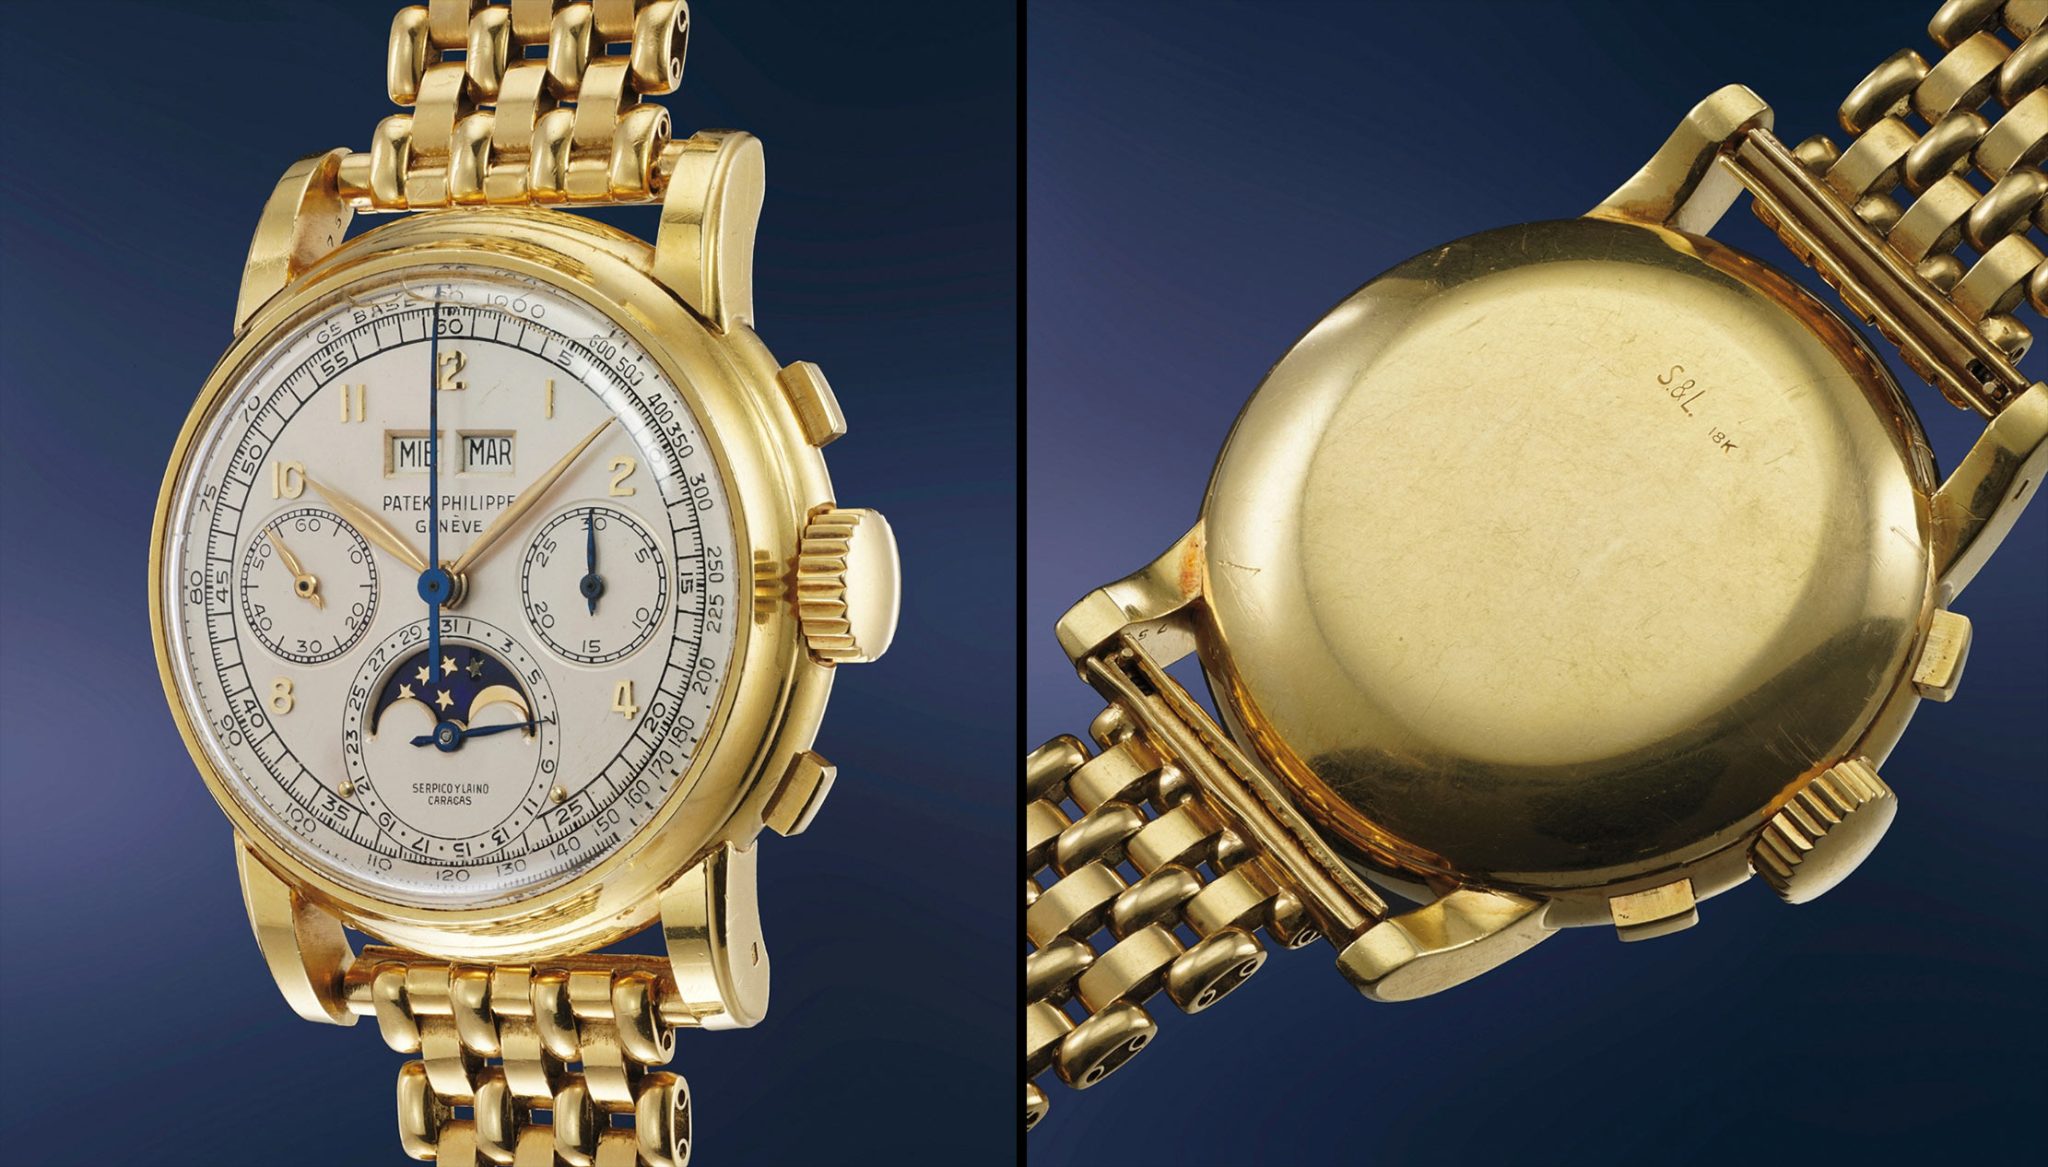 The Most Expensive Patek Philippe Wristwatches of All Time